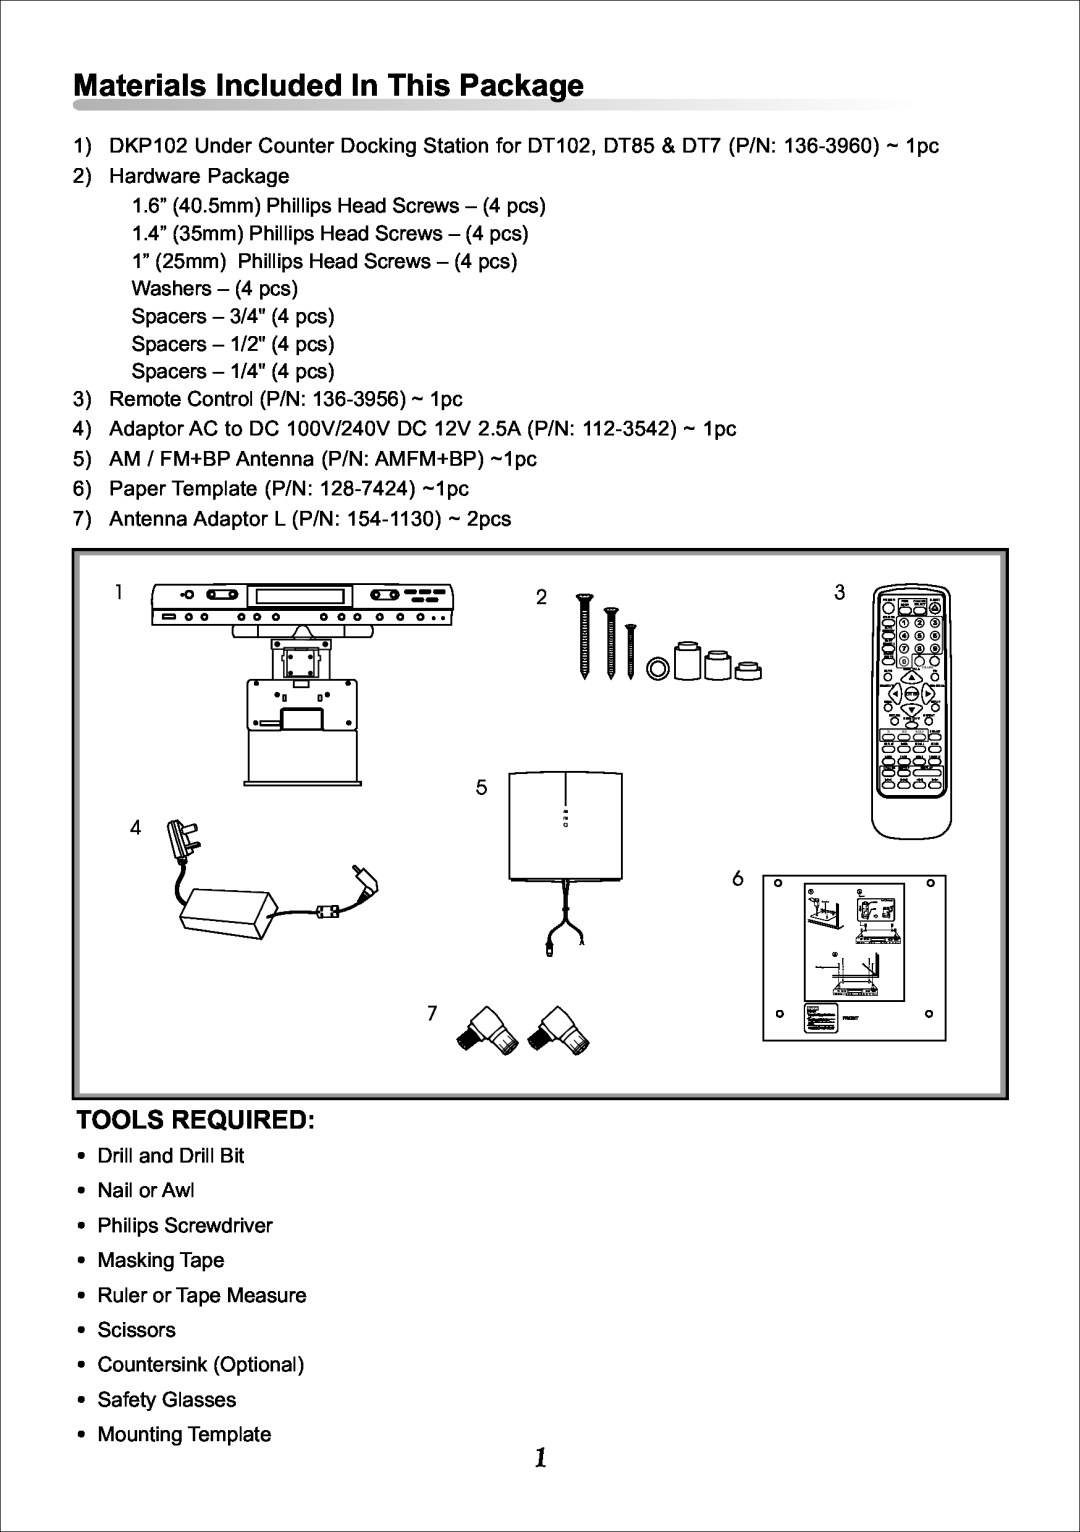 Audiovox DKP102 installation manual Materials Included In This Package, Tools Required 